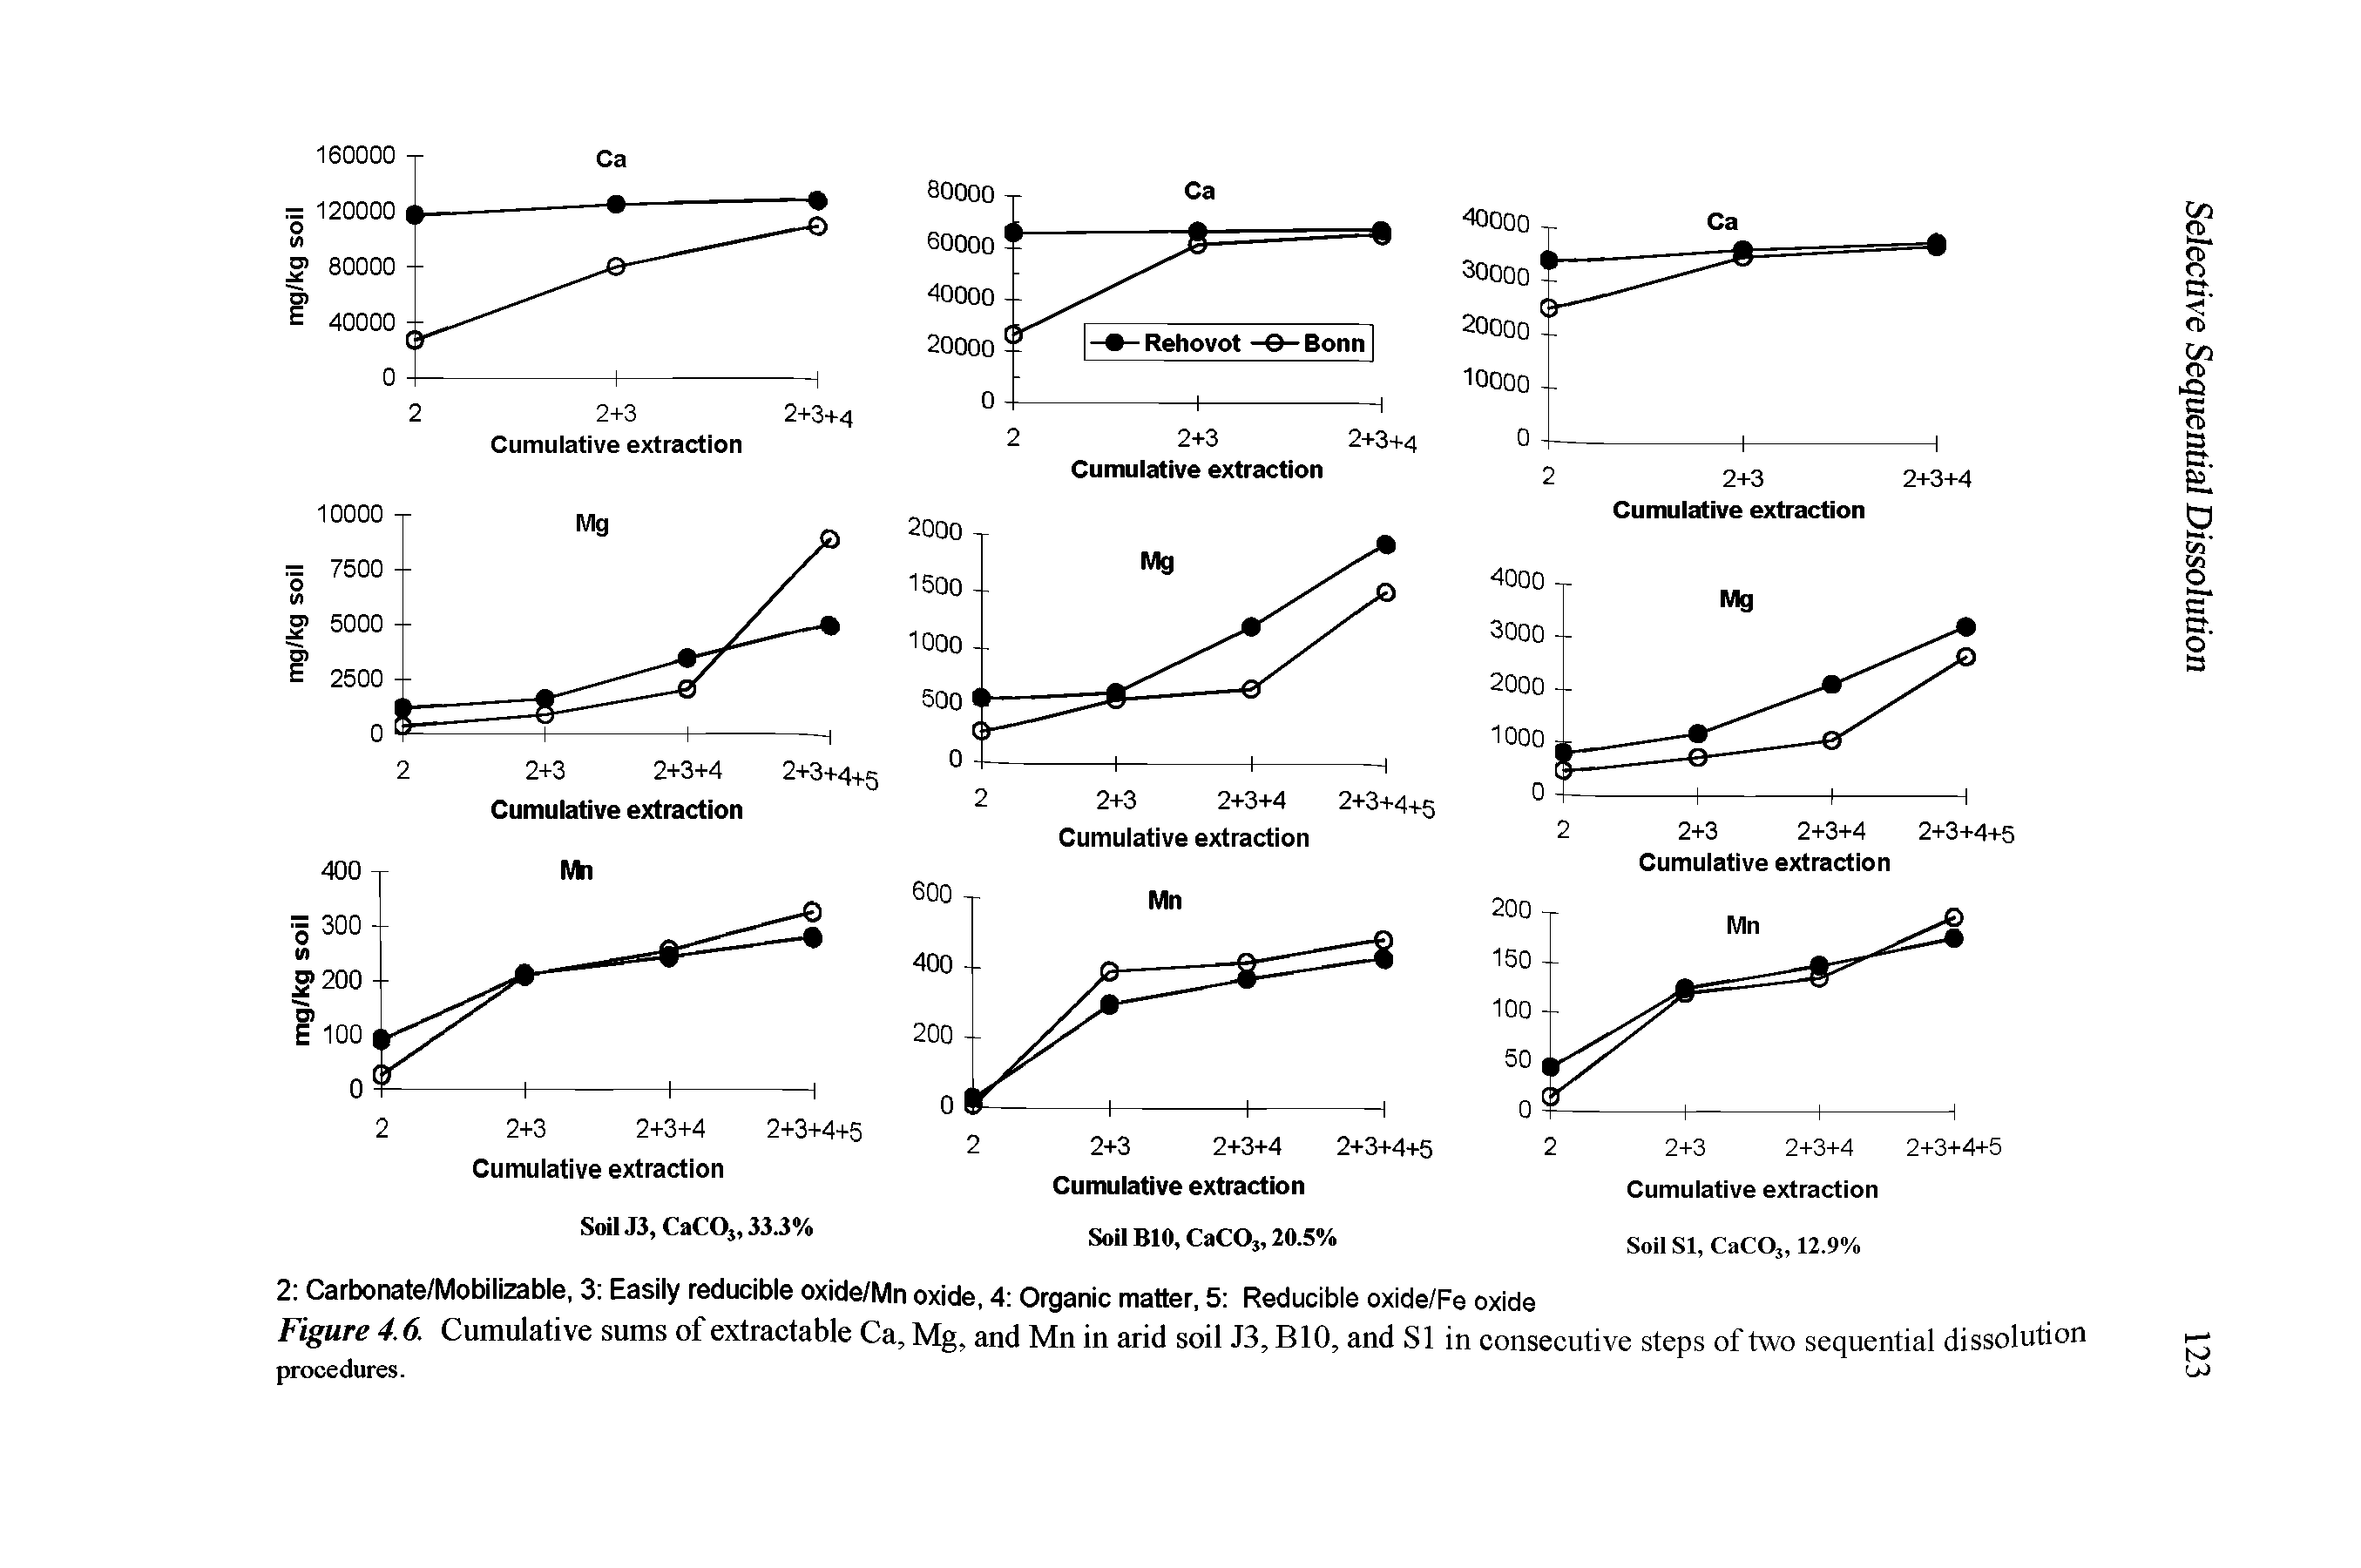 Figure 4.6. Cumulative sums of extractable Ca, Mg, and Mn in arid soil J3, BIO, and SI in consecutive steps of two sequential dissolution procedures.